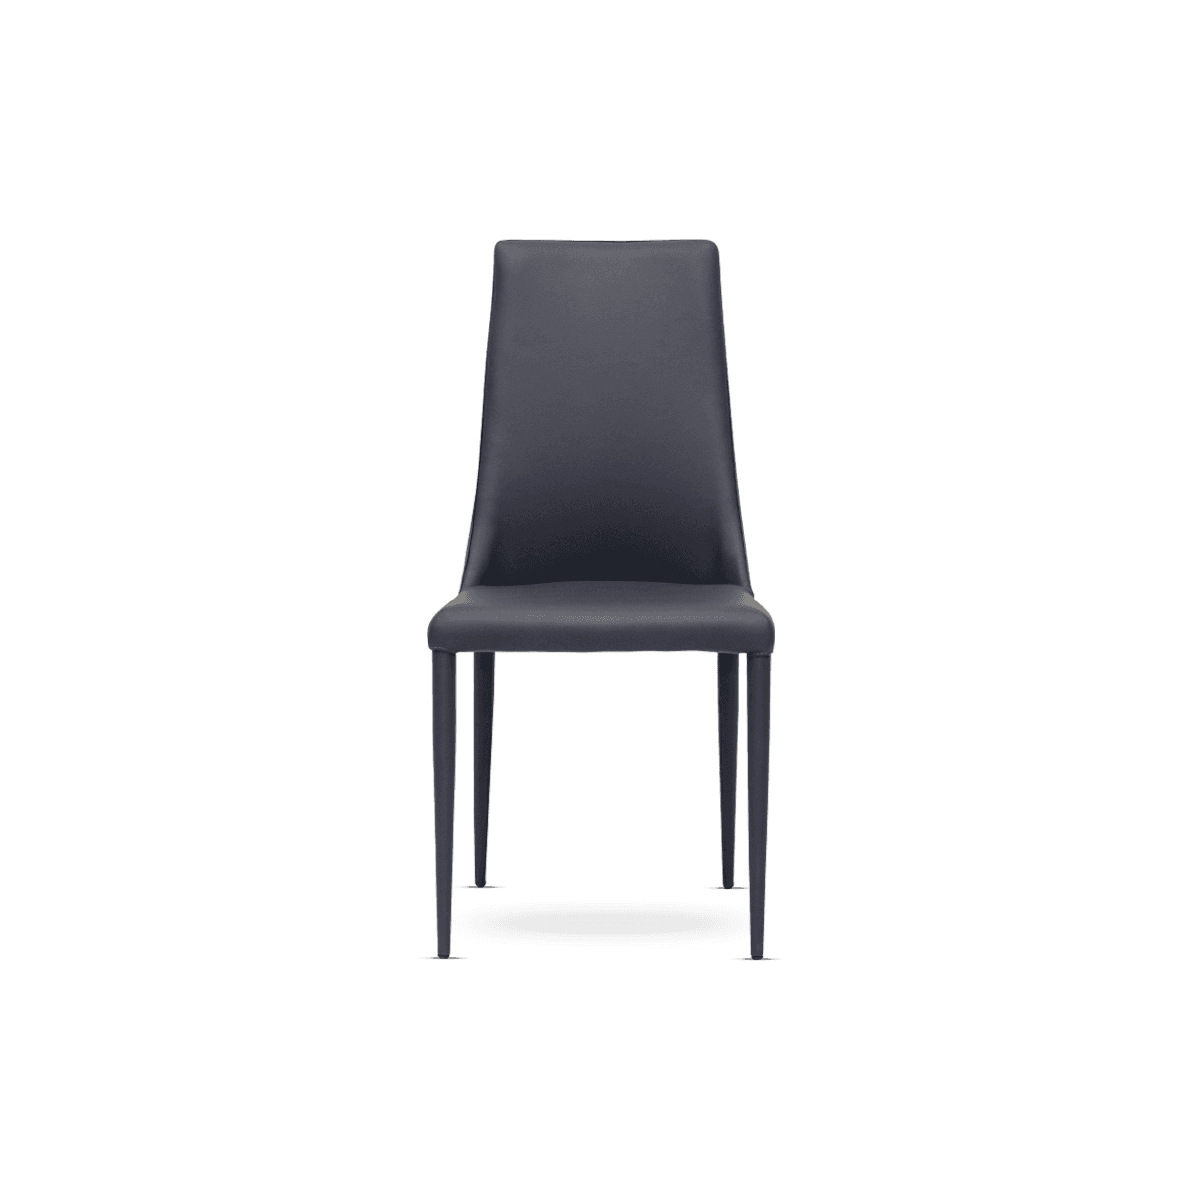 Aloe Xl Soft Leather Upholstered Chair